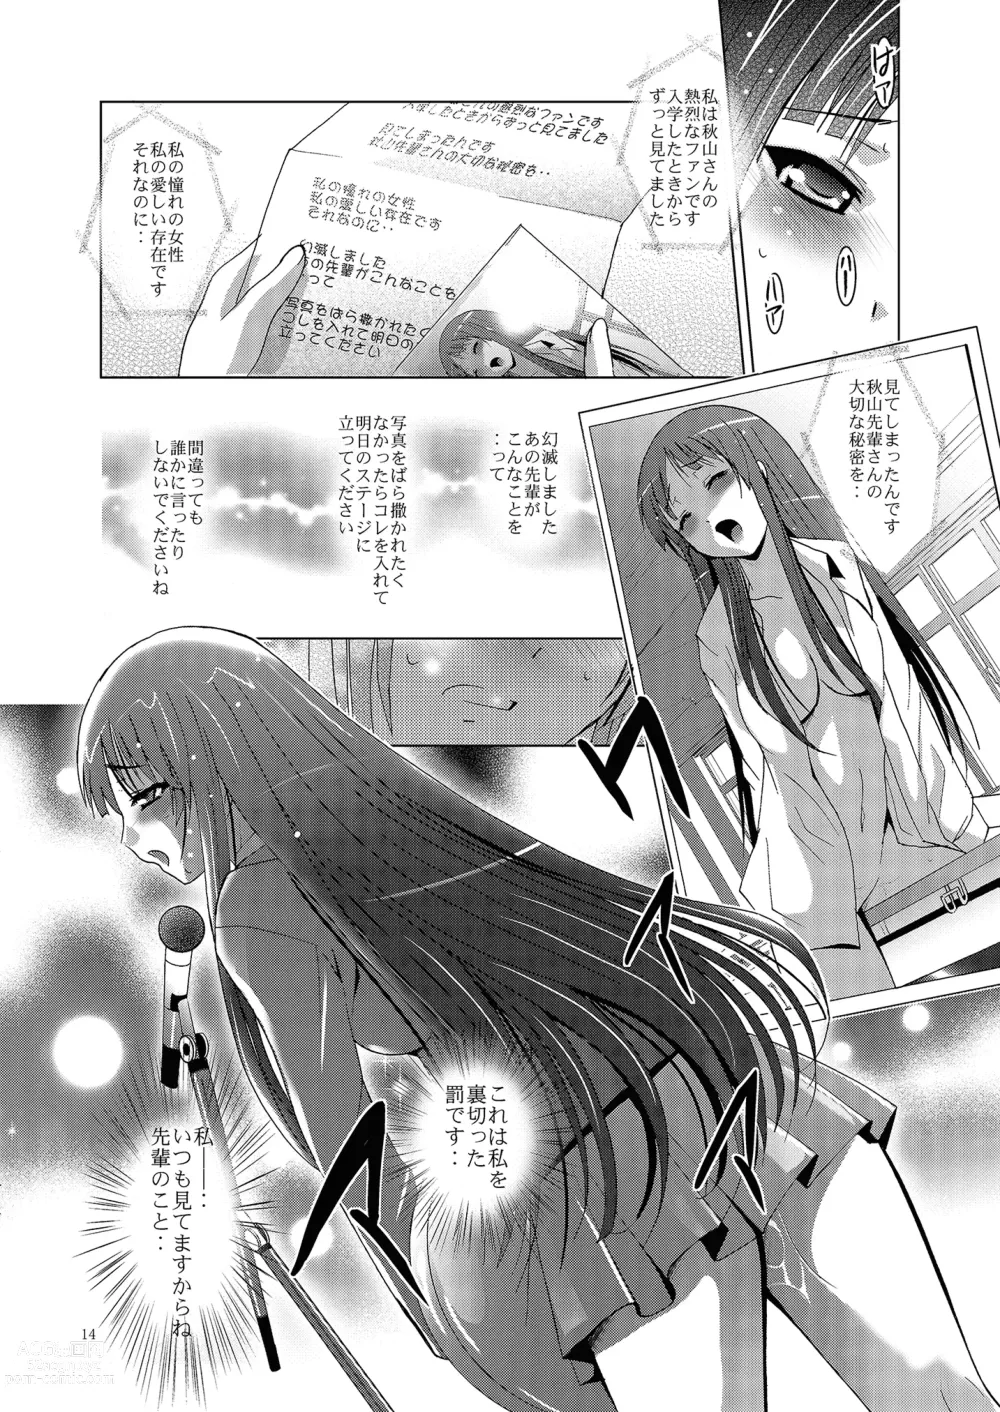 Page 14 of doujinshi MOUSOU THEATER 27